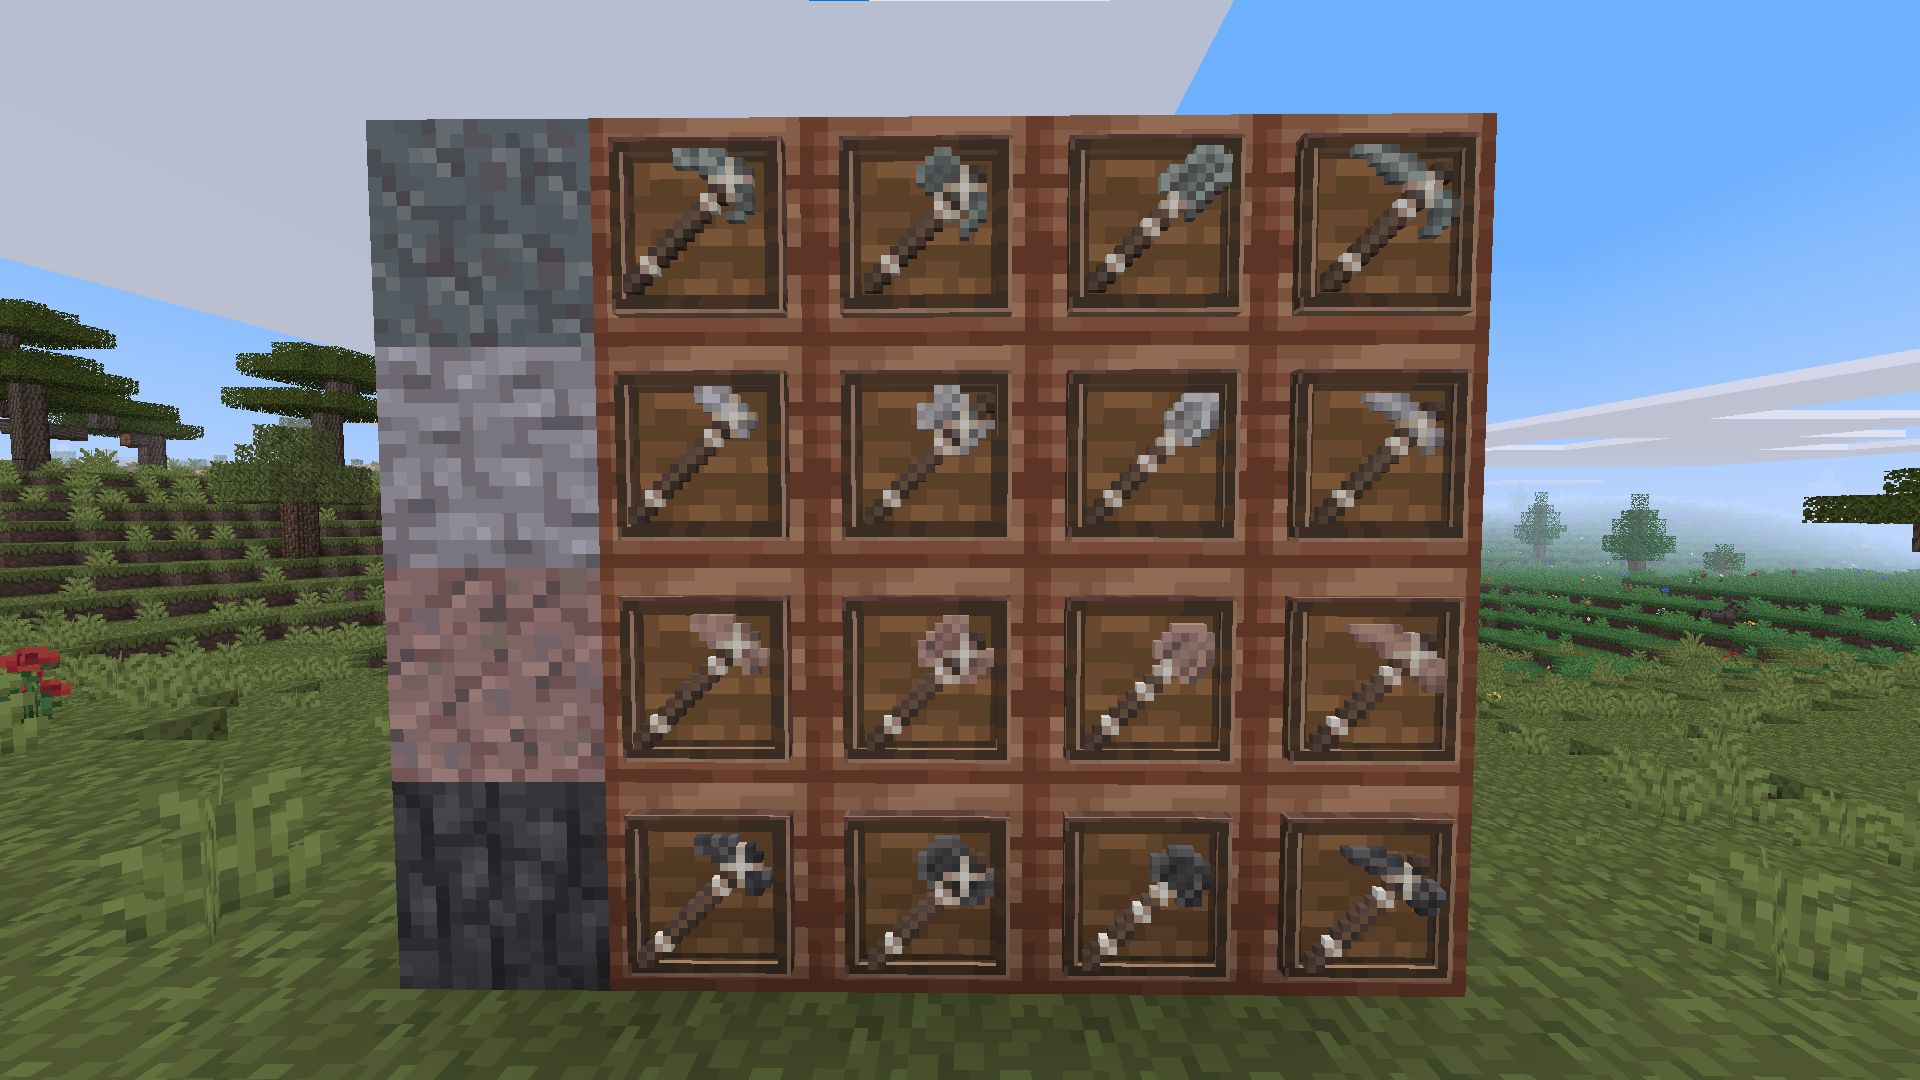 All added tools: Andesite, Diorite, Granite, and Deepslate hoes/axes/shovels/picks.